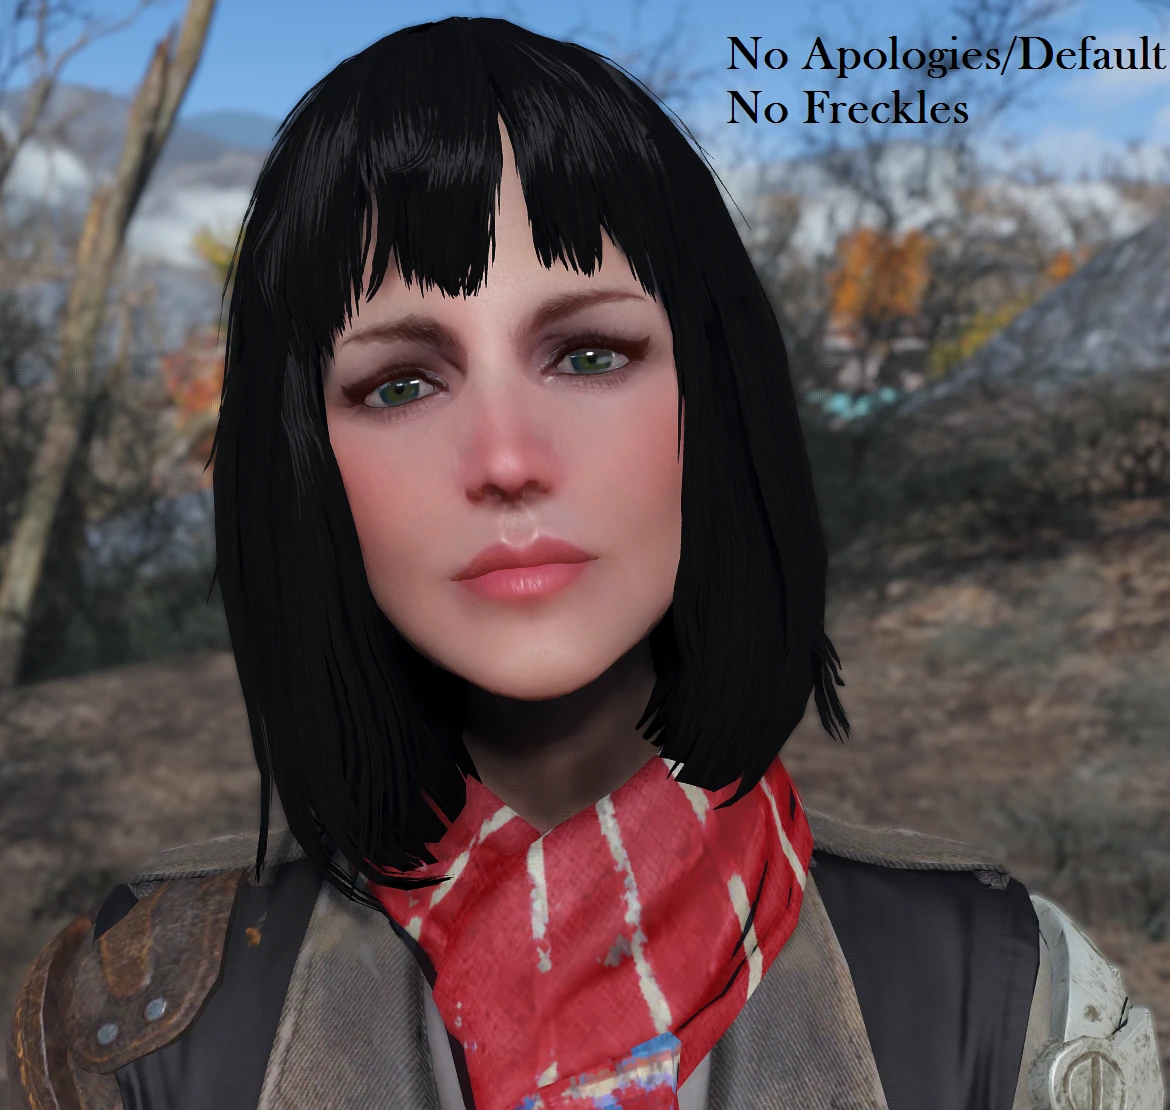 fallout 4 appearance mods